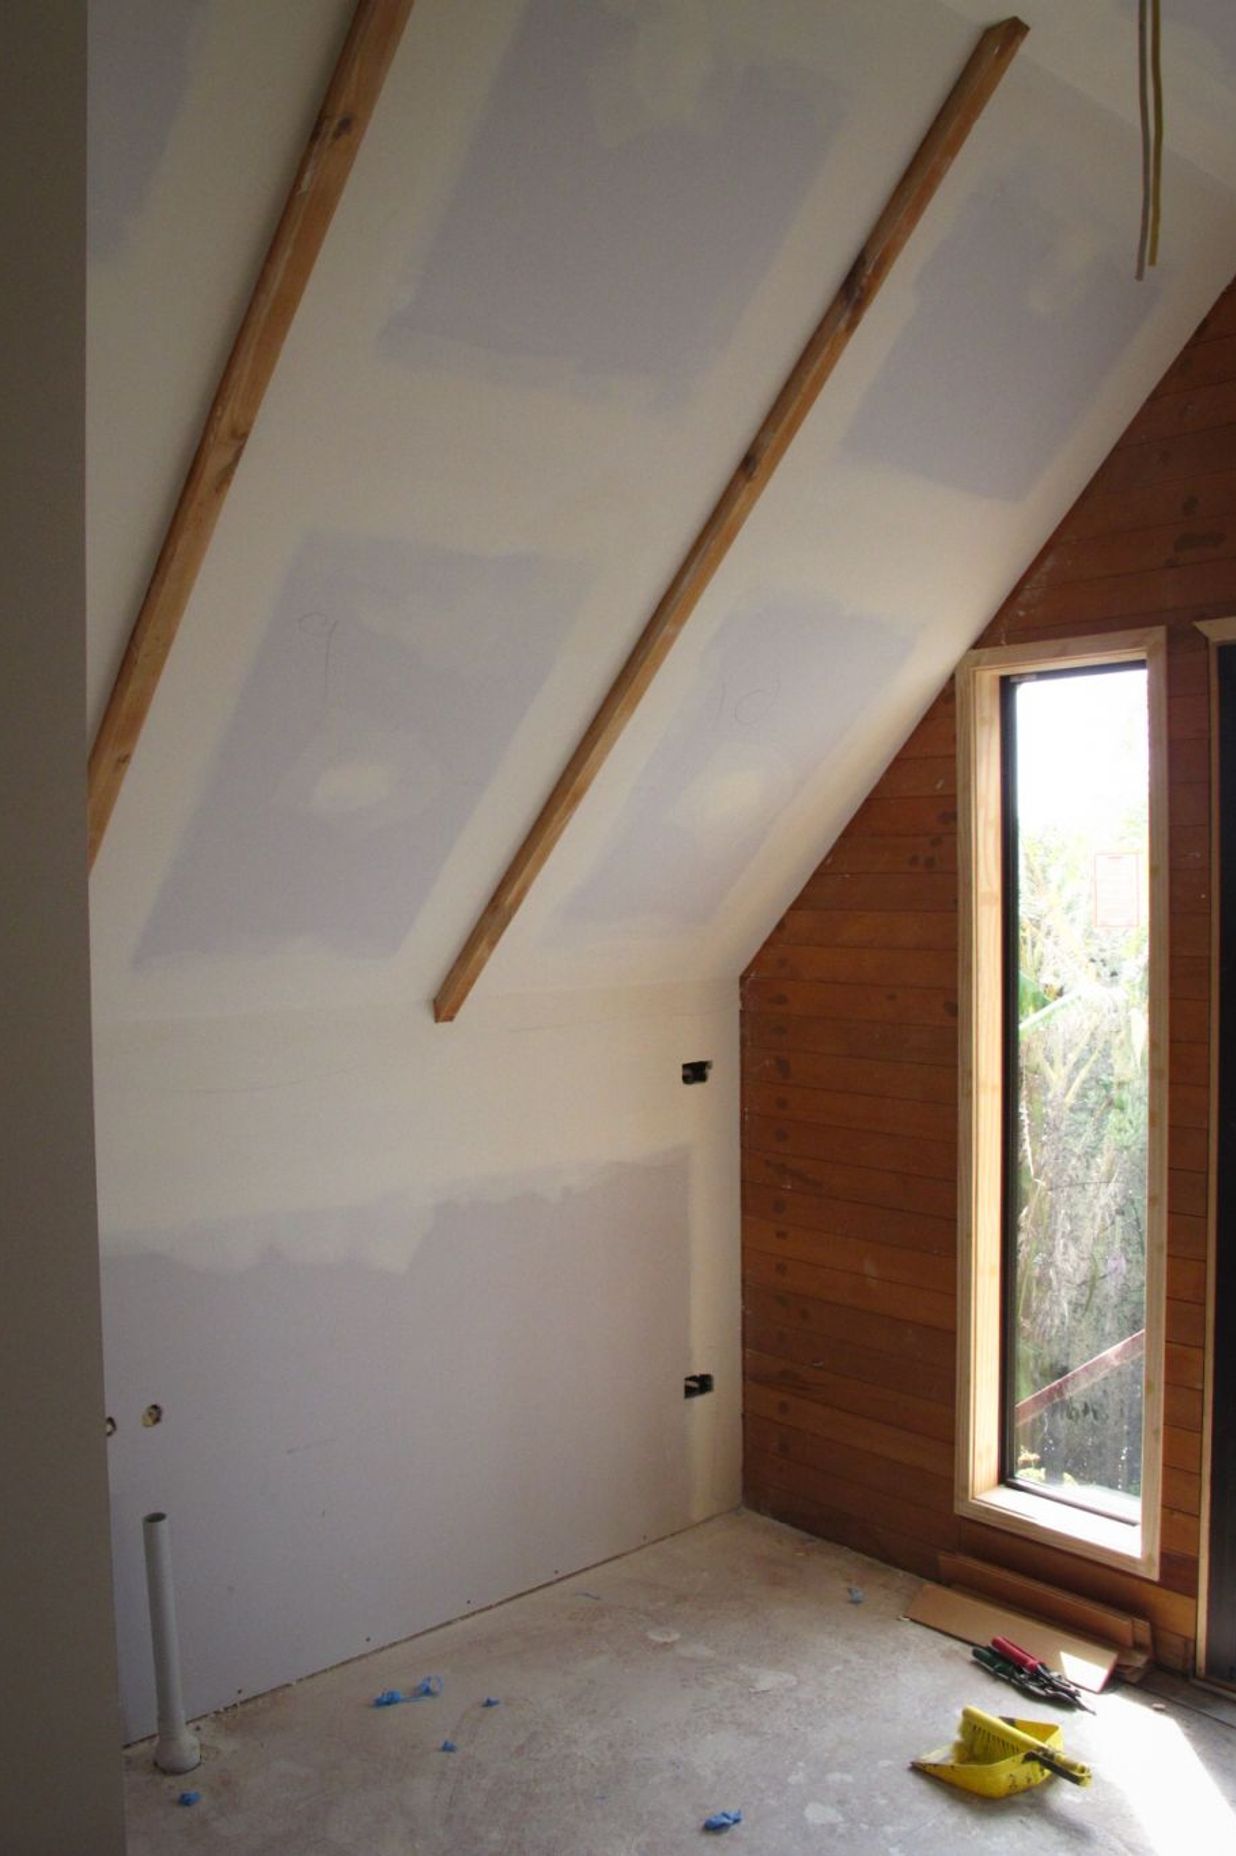 An Attic conversion on the Tutukaka Coast.  Kaiser Construction built a 1 bedroom apartment in the attic space above a garage